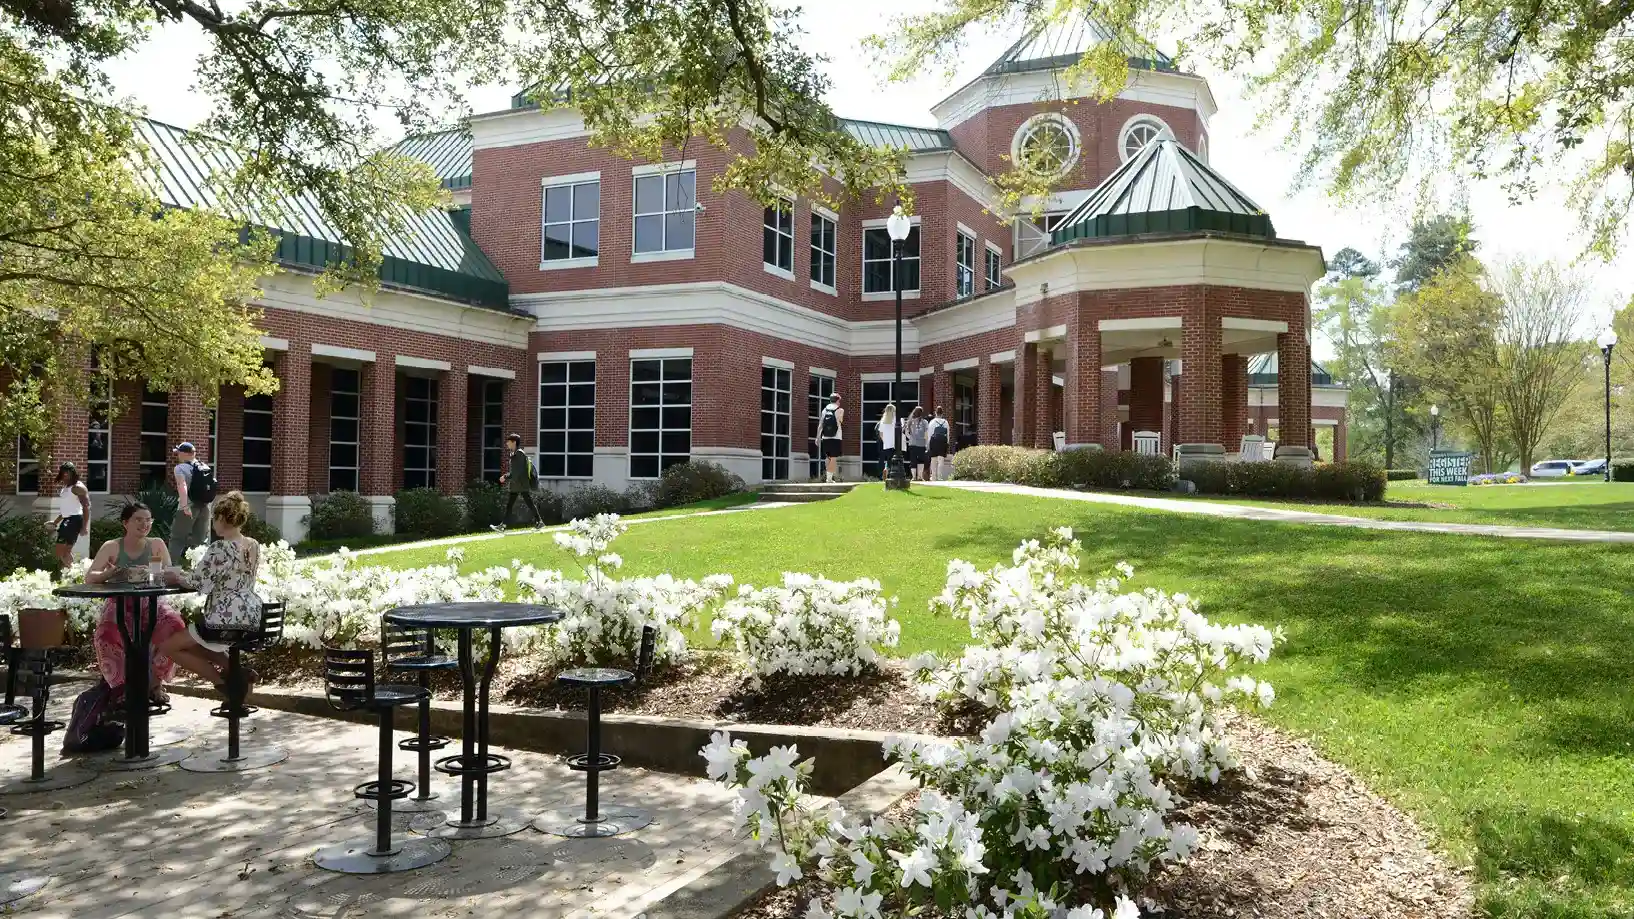 student center with white azaleas in bloom